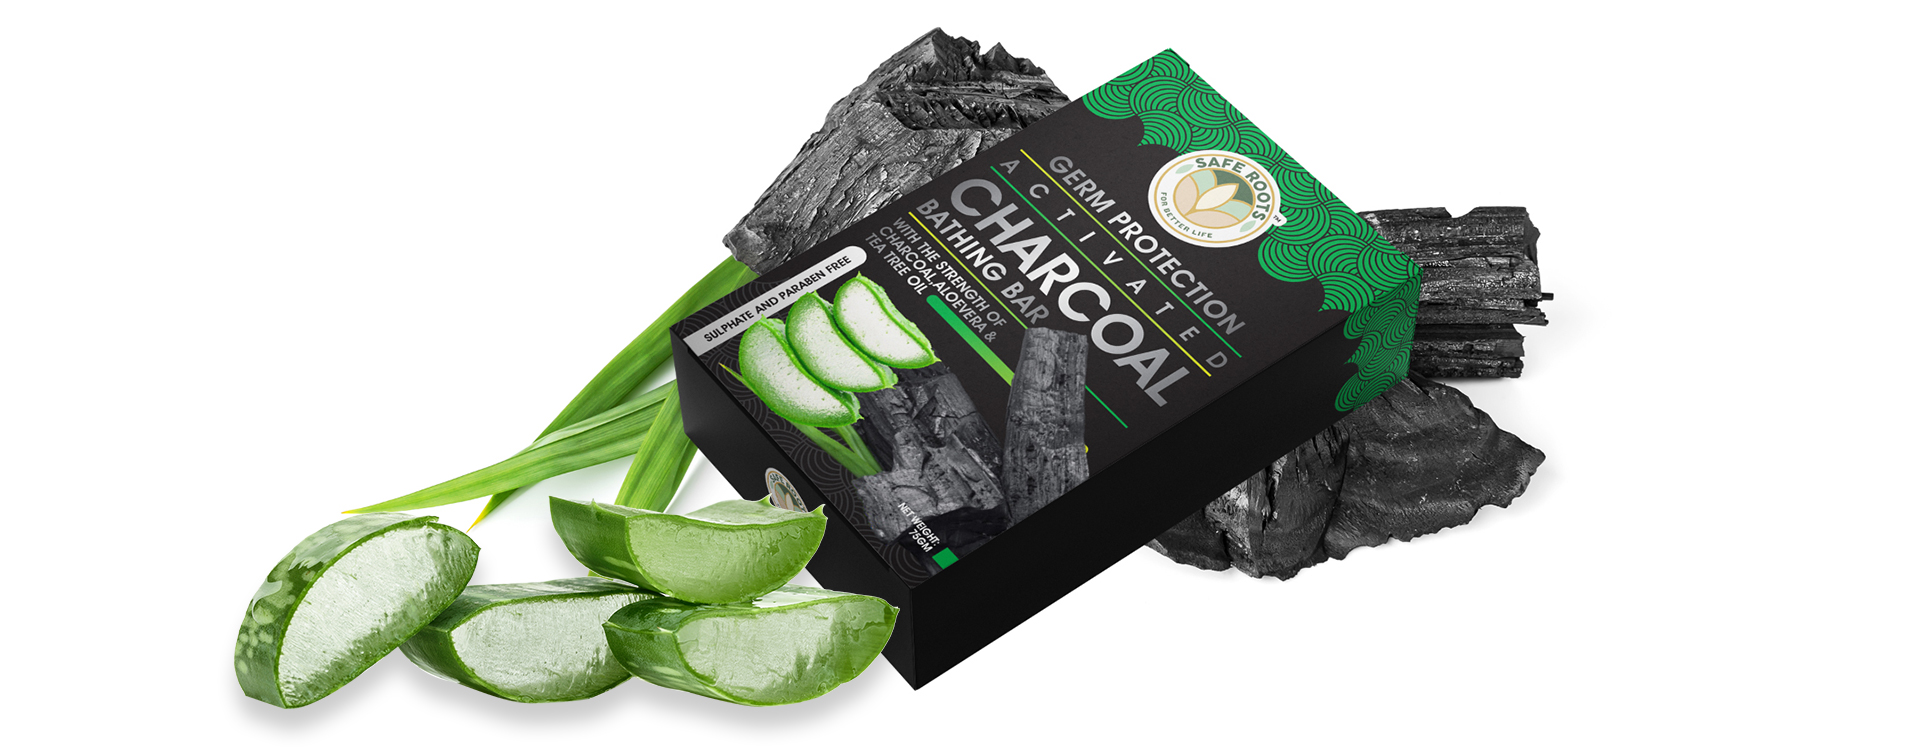 Saferoot Charcoal soap